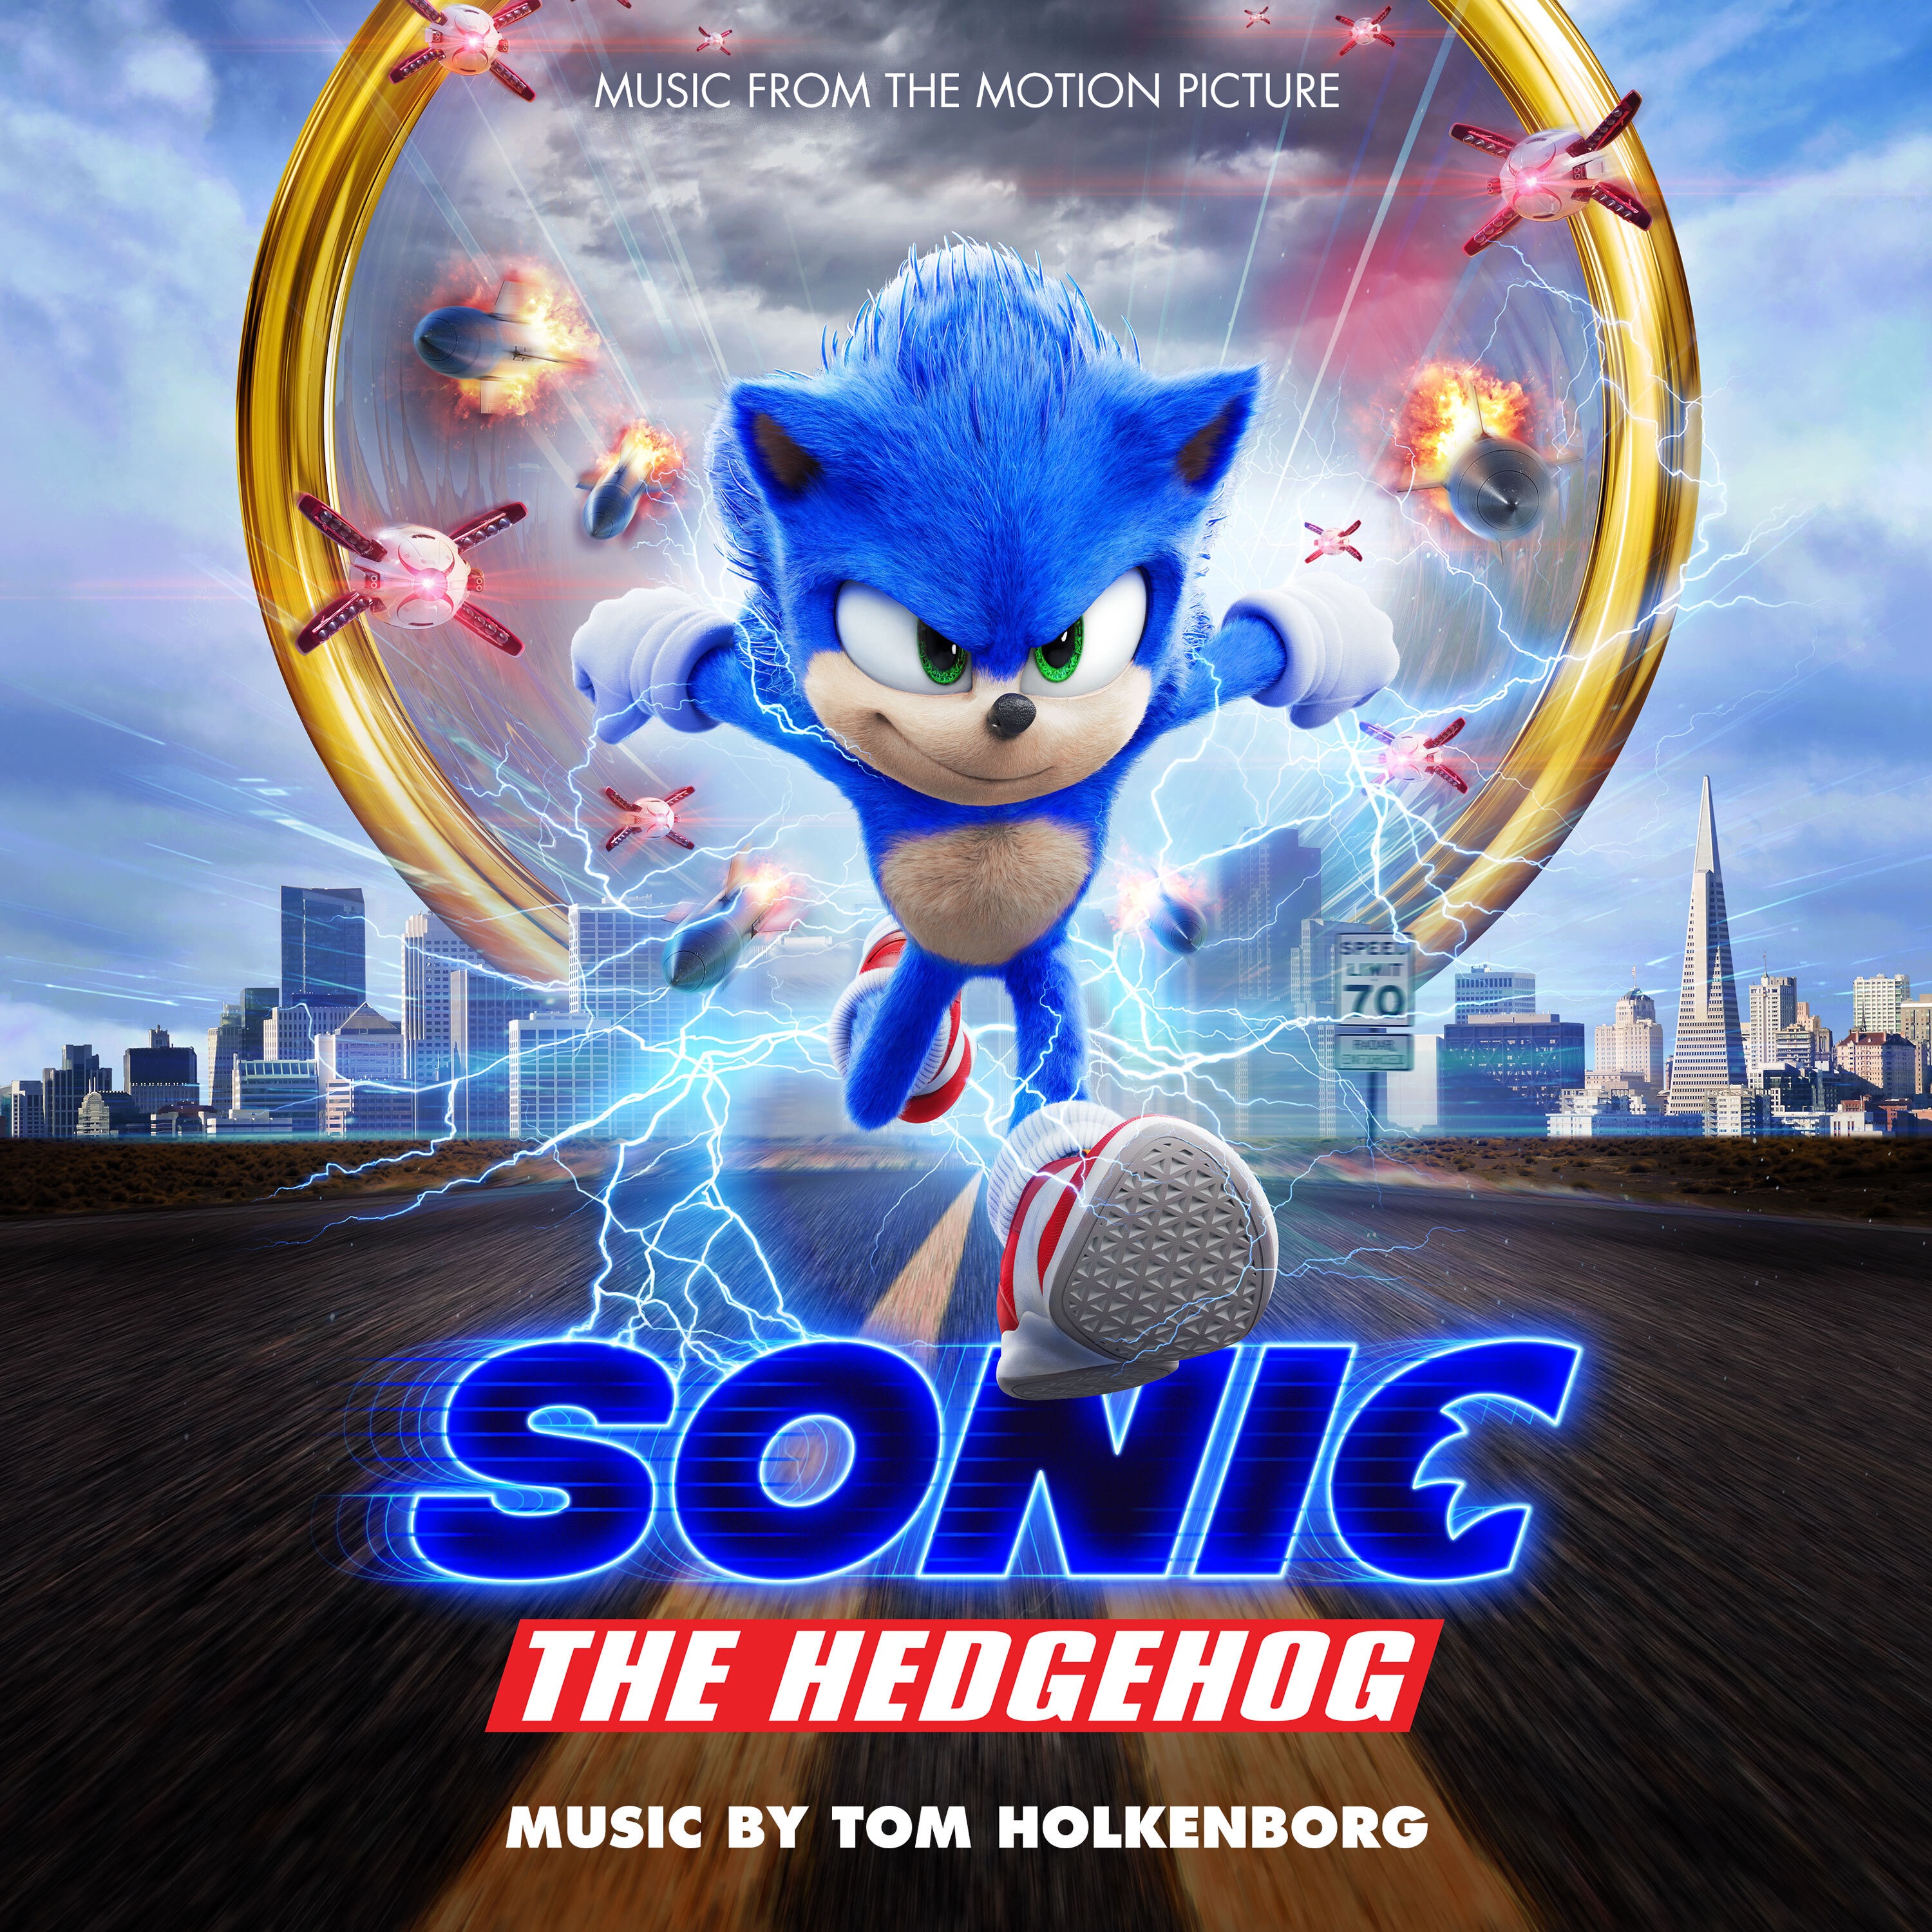 sonic the hedgehog 1 and 2 soundtrack